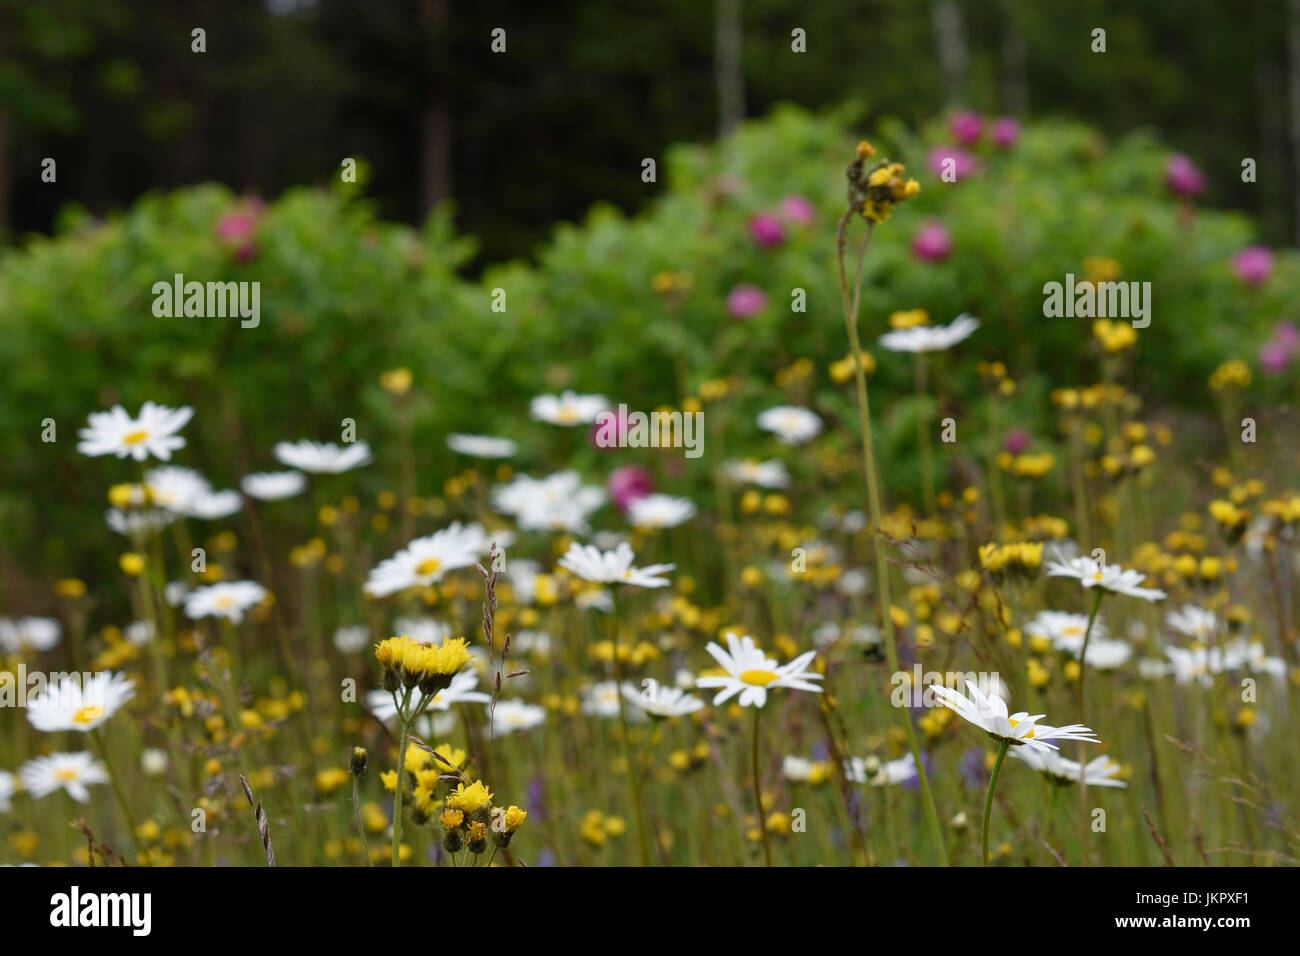 Ox-eye daisy (leucanthemum vulgare) and rough hawkbit (leontodon hispidus) on a meadow with rosebush in background, picture from the North of Sweden. Stock Photo